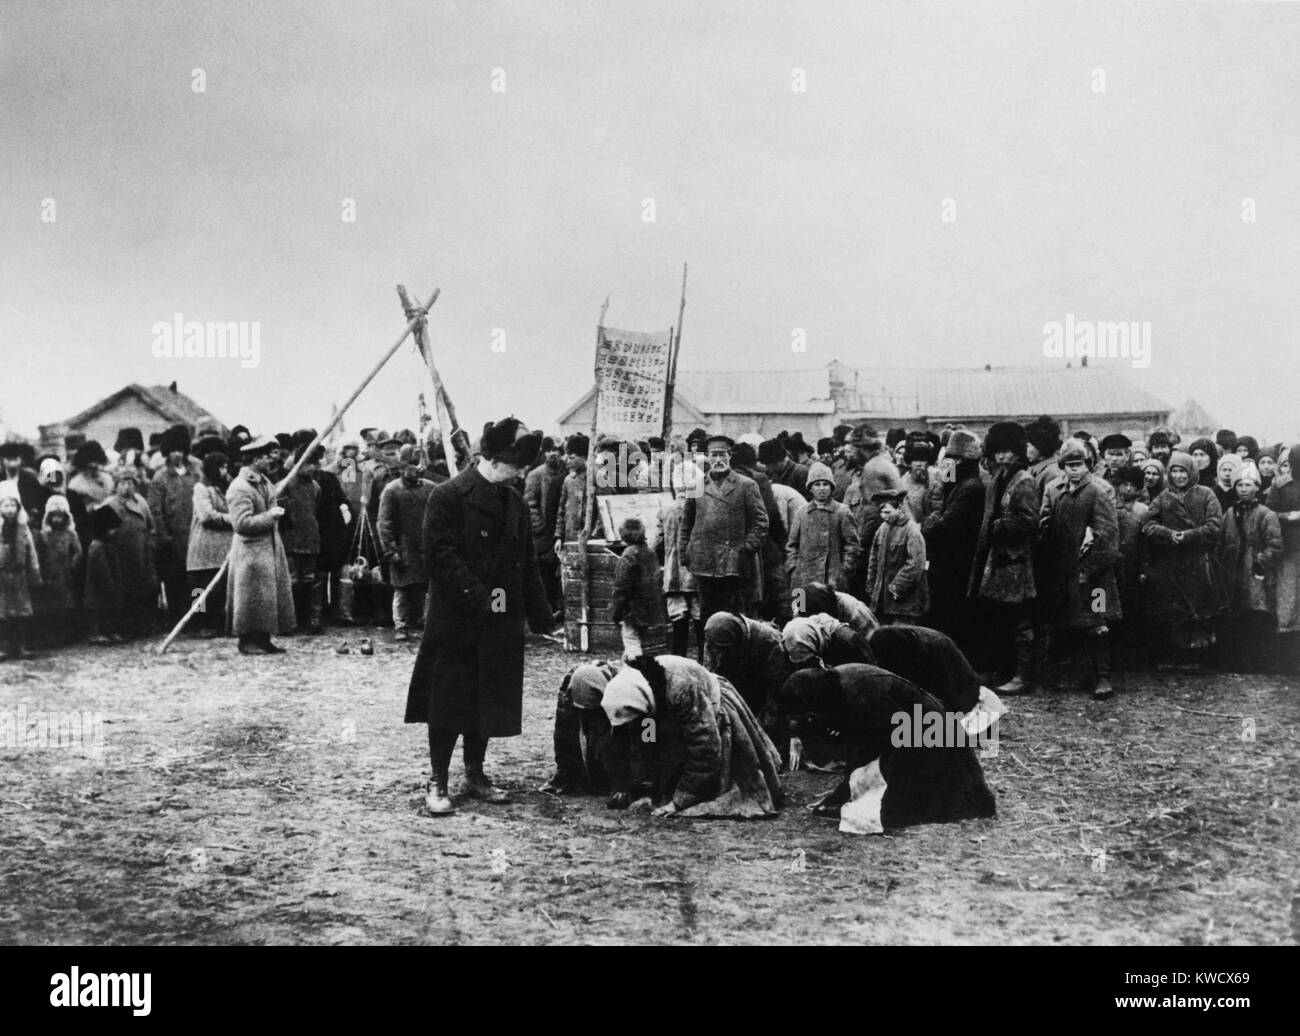 American Relief Administration distributing food in the Volga District, 1921. Russian women abjectly kneel nearby (BSLOC 2017 2 26) Stock Photo